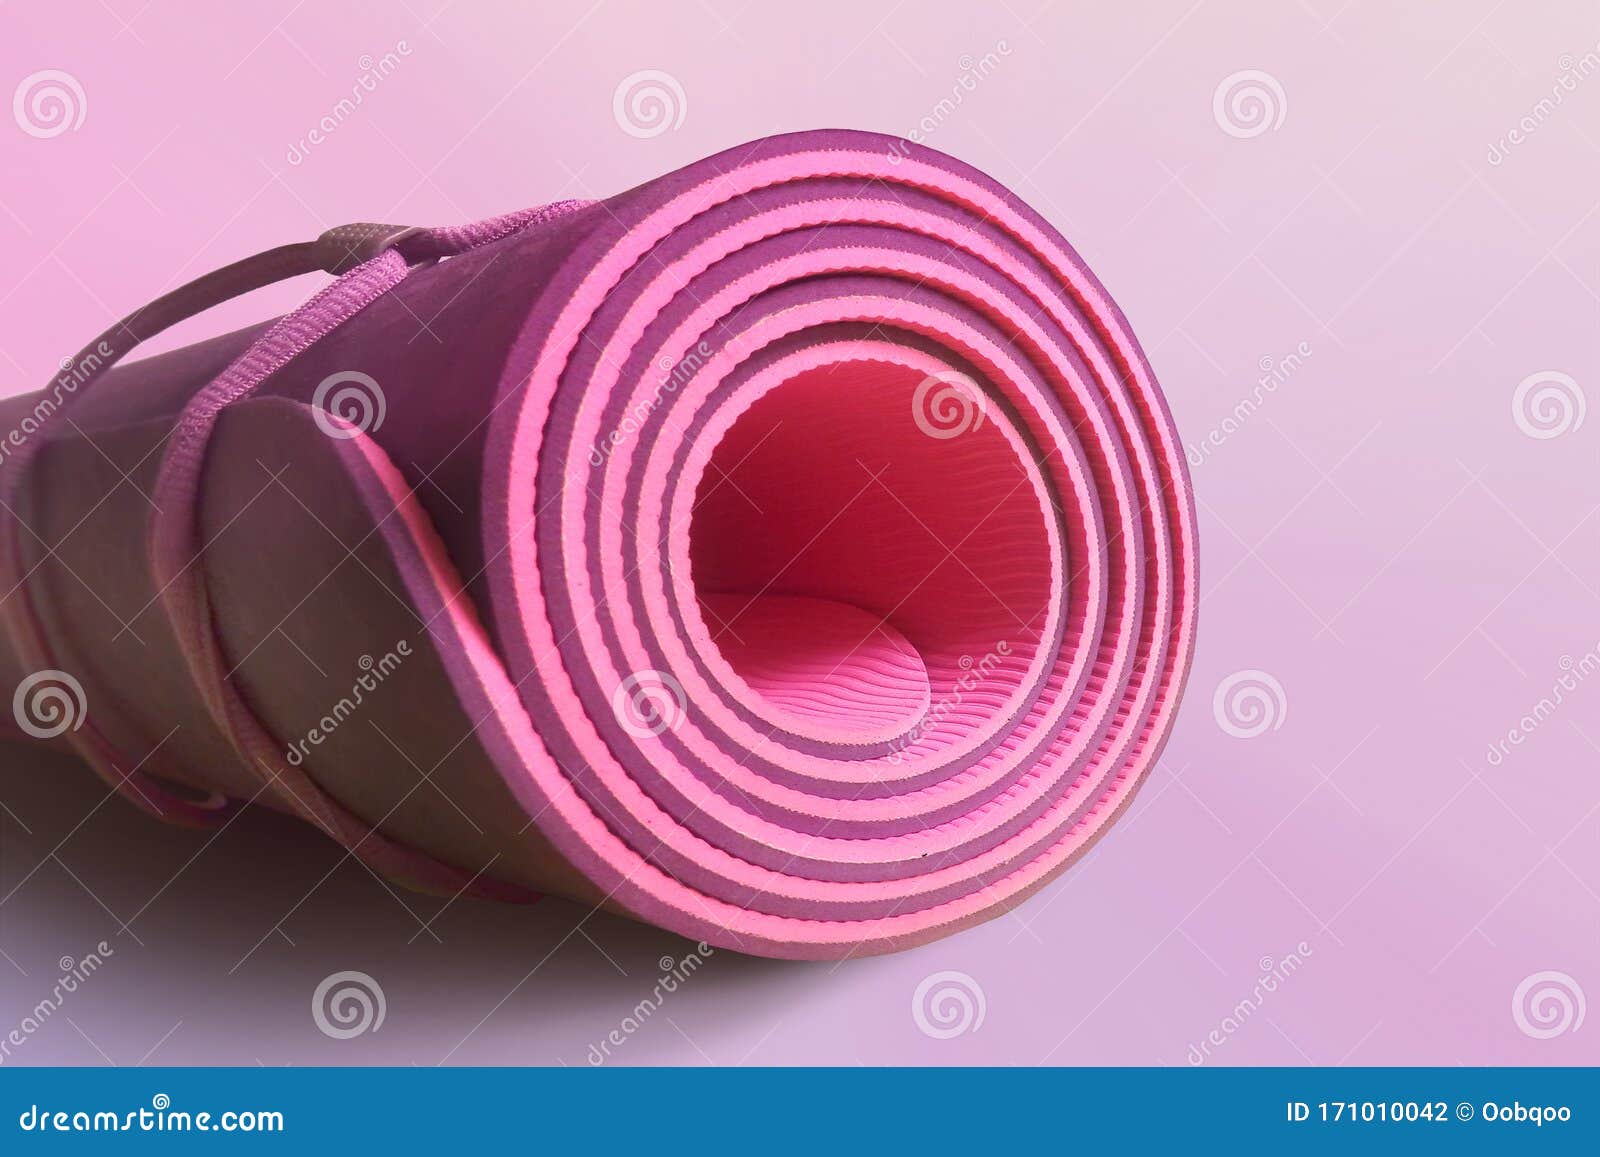 Pink Half Rolled Yoga Mat on Magenta Background. Yoga and Pilates ...